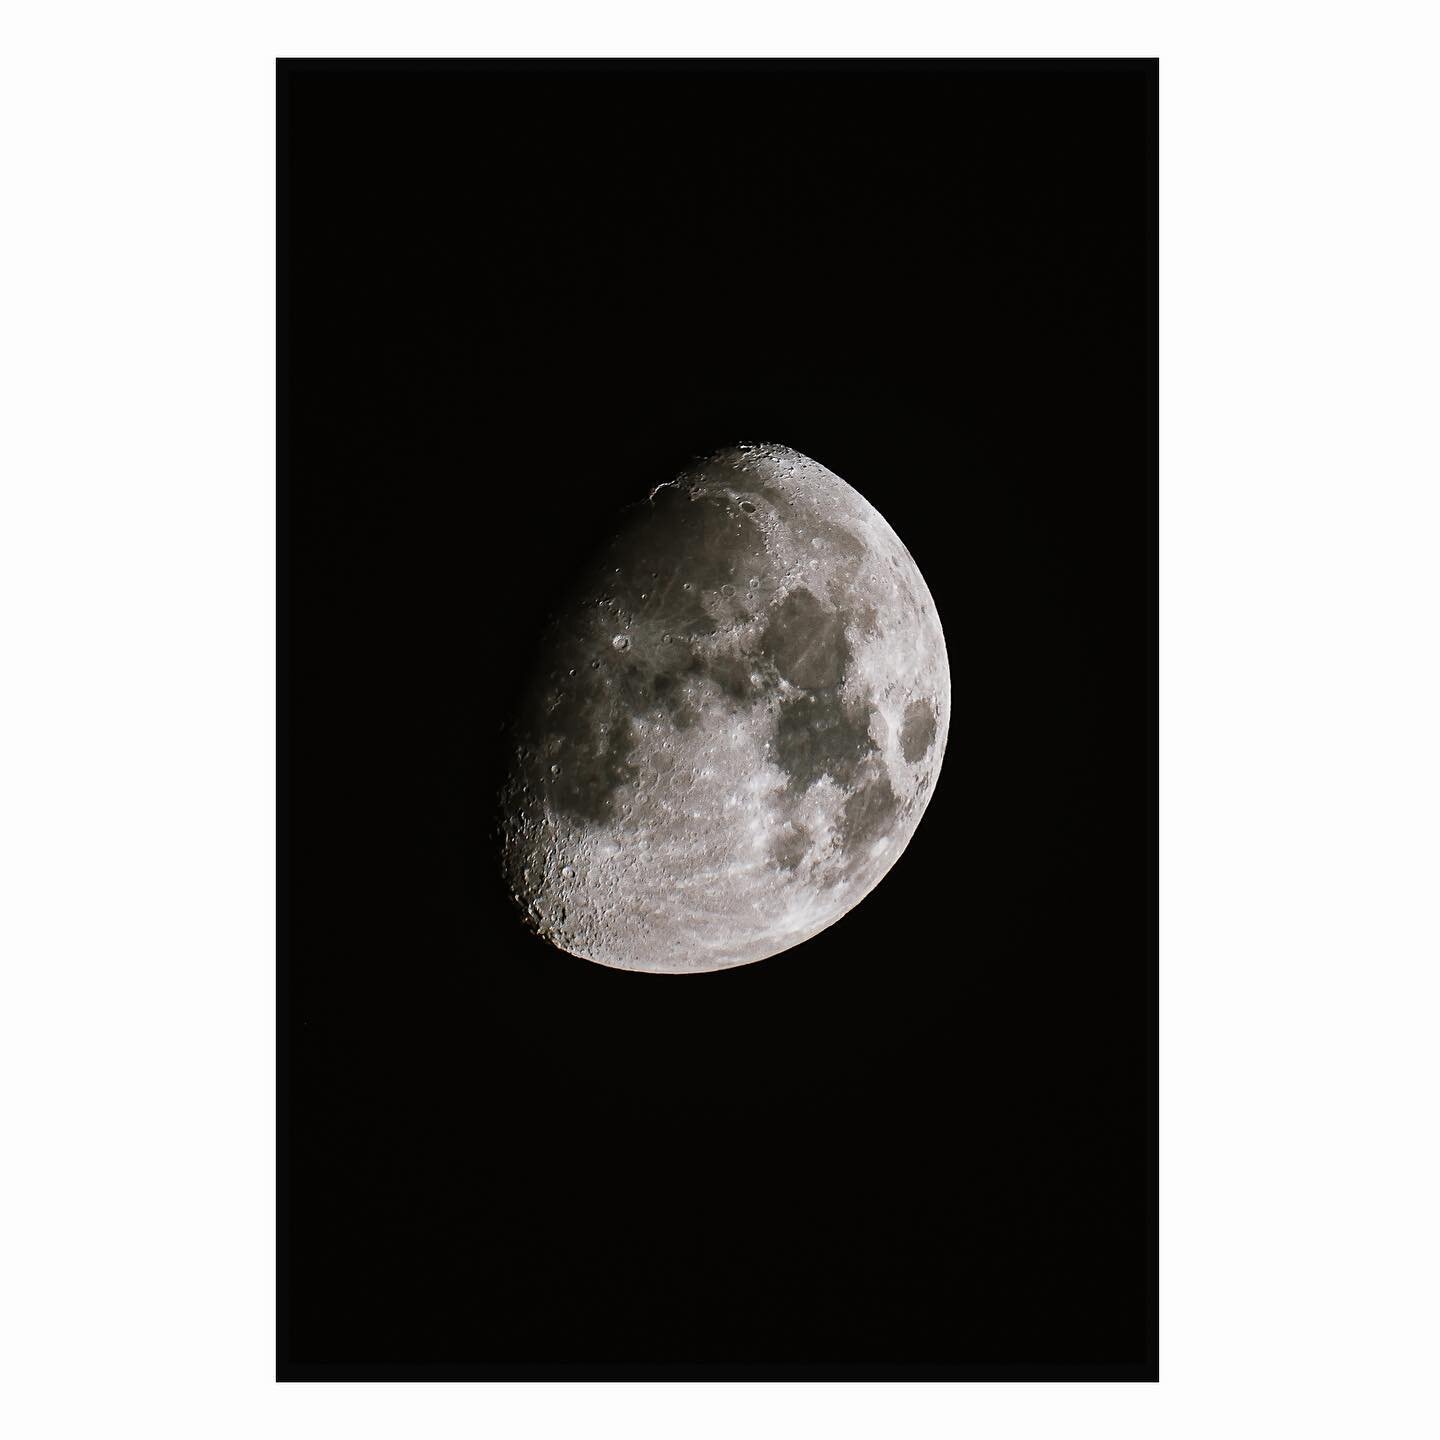 MOON | 08082022 | SPAIN 

DateTimeOriginal
2022:08:08 00:51:52

LEICA SL2
MAKSUTOV 500 mm
Gitzo Mountaineer
29.0 C  Sureste 7-17 km/h
0:51:52
40&deg;15'53 2&quot;N4&deg;21'08 A&quot;W
08 AGO 2022

All rights reserved. More images to buy in the bios l